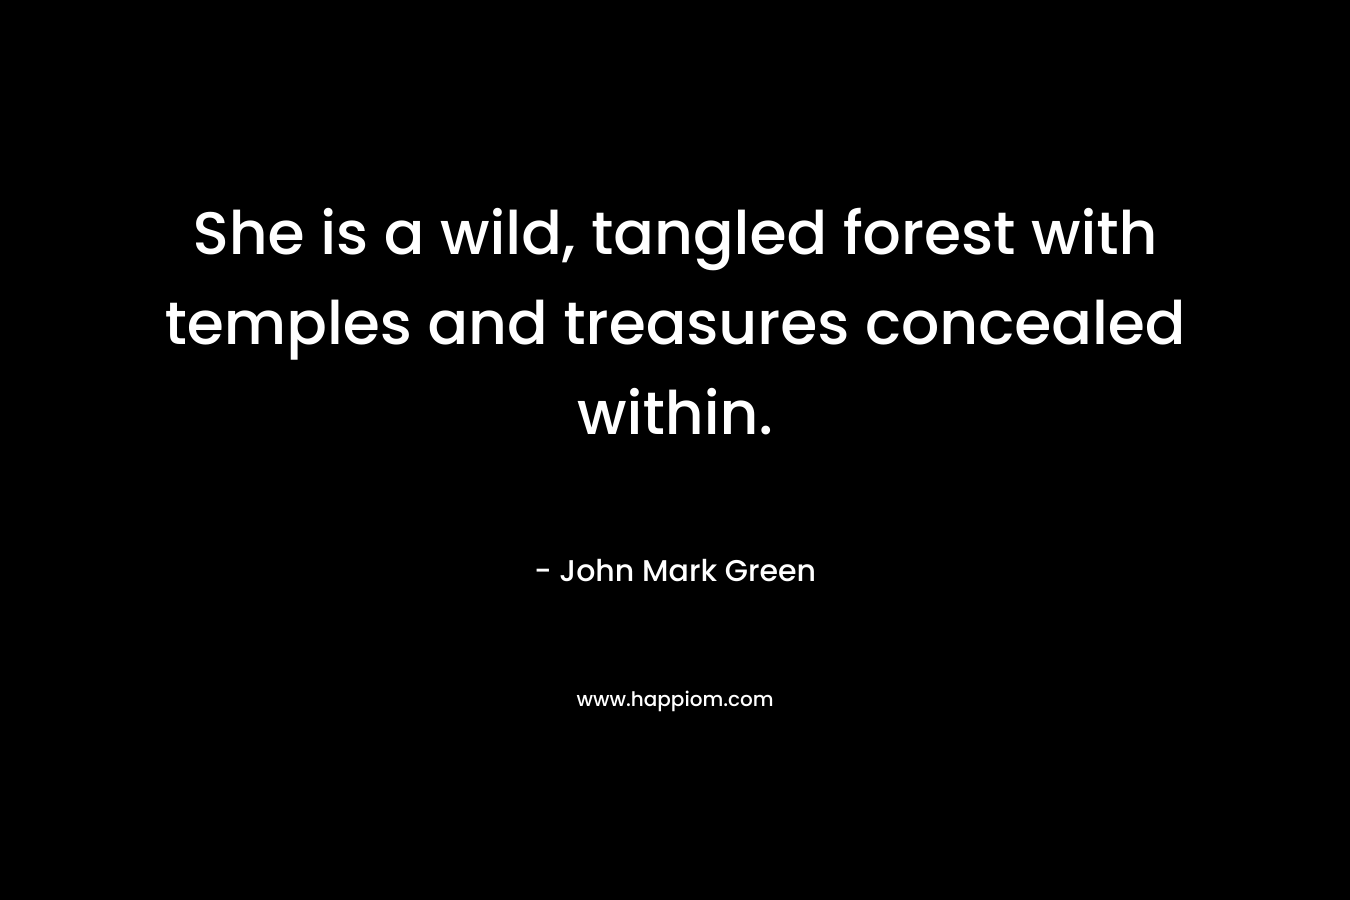 She is a wild, tangled forest with temples and treasures concealed within. – John Mark Green